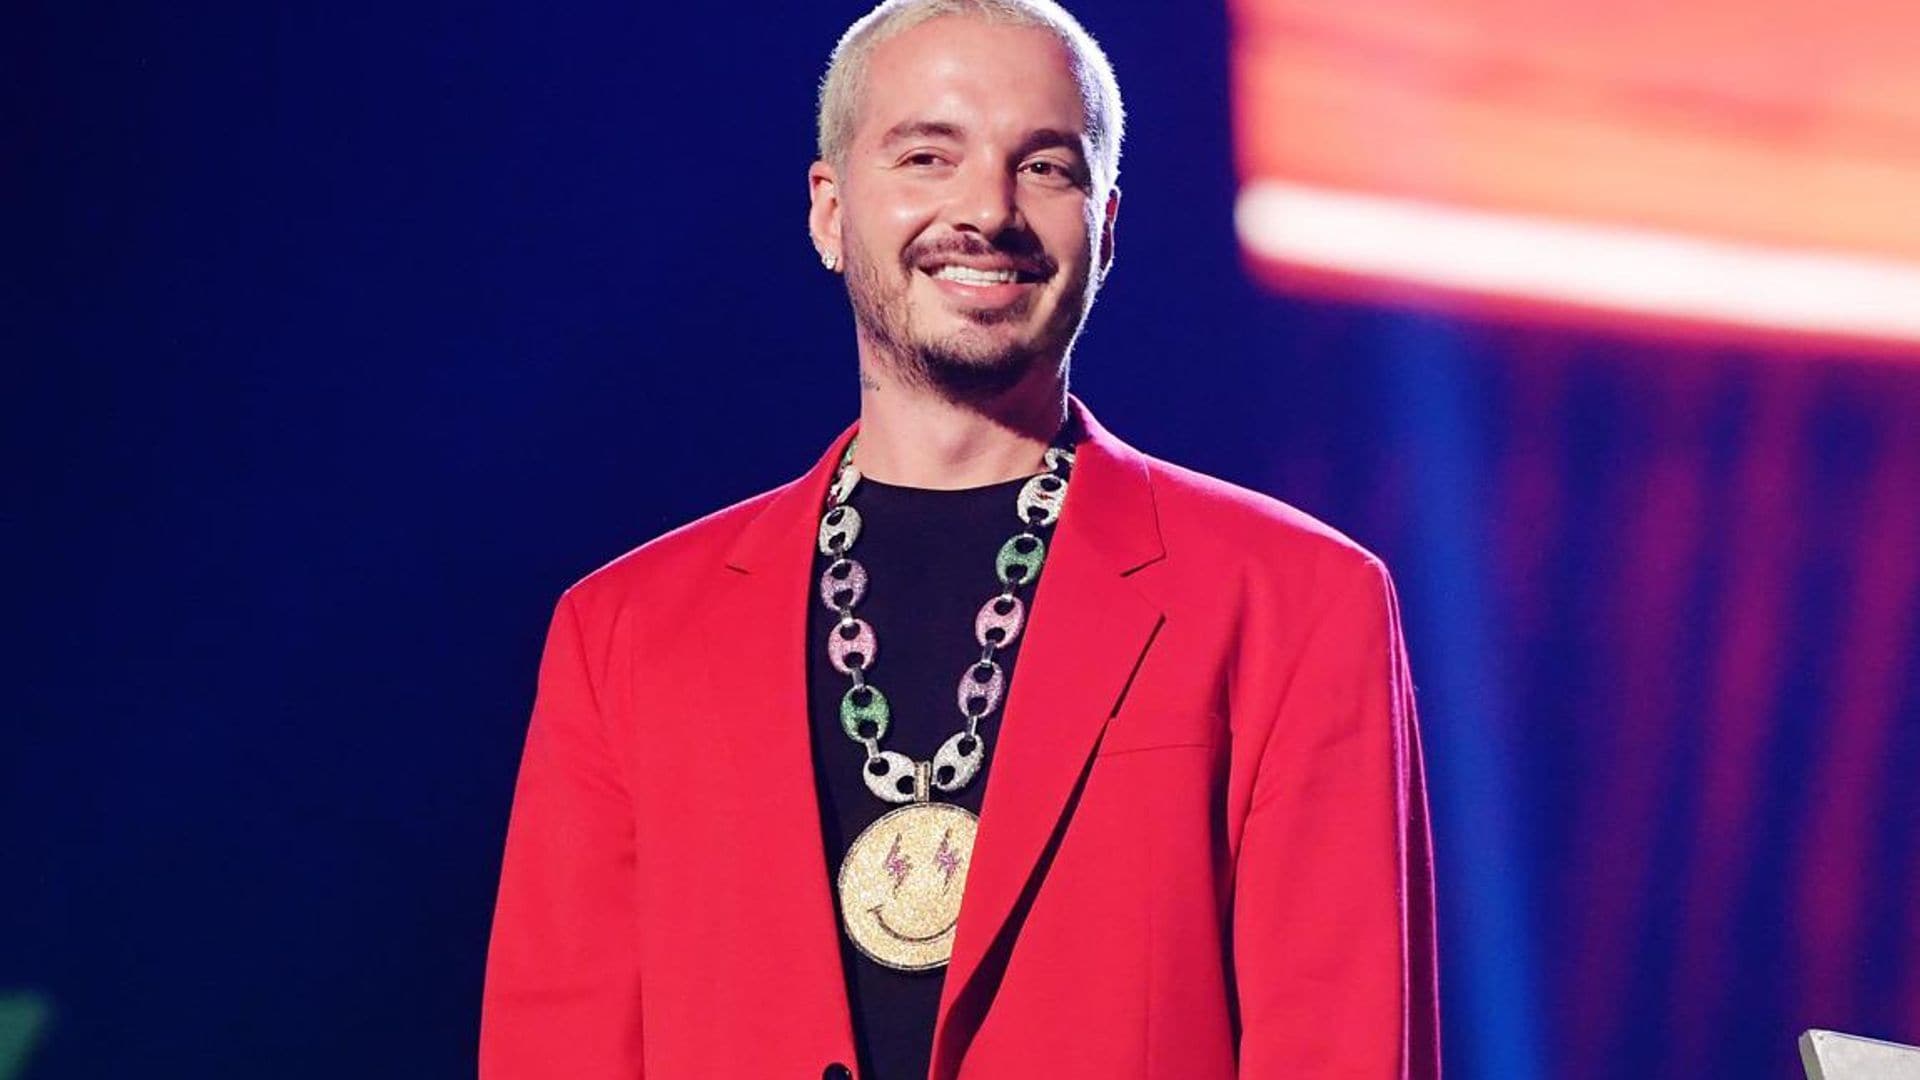 J Balvin opens up about COVID-19 battle: 'I got it bad'